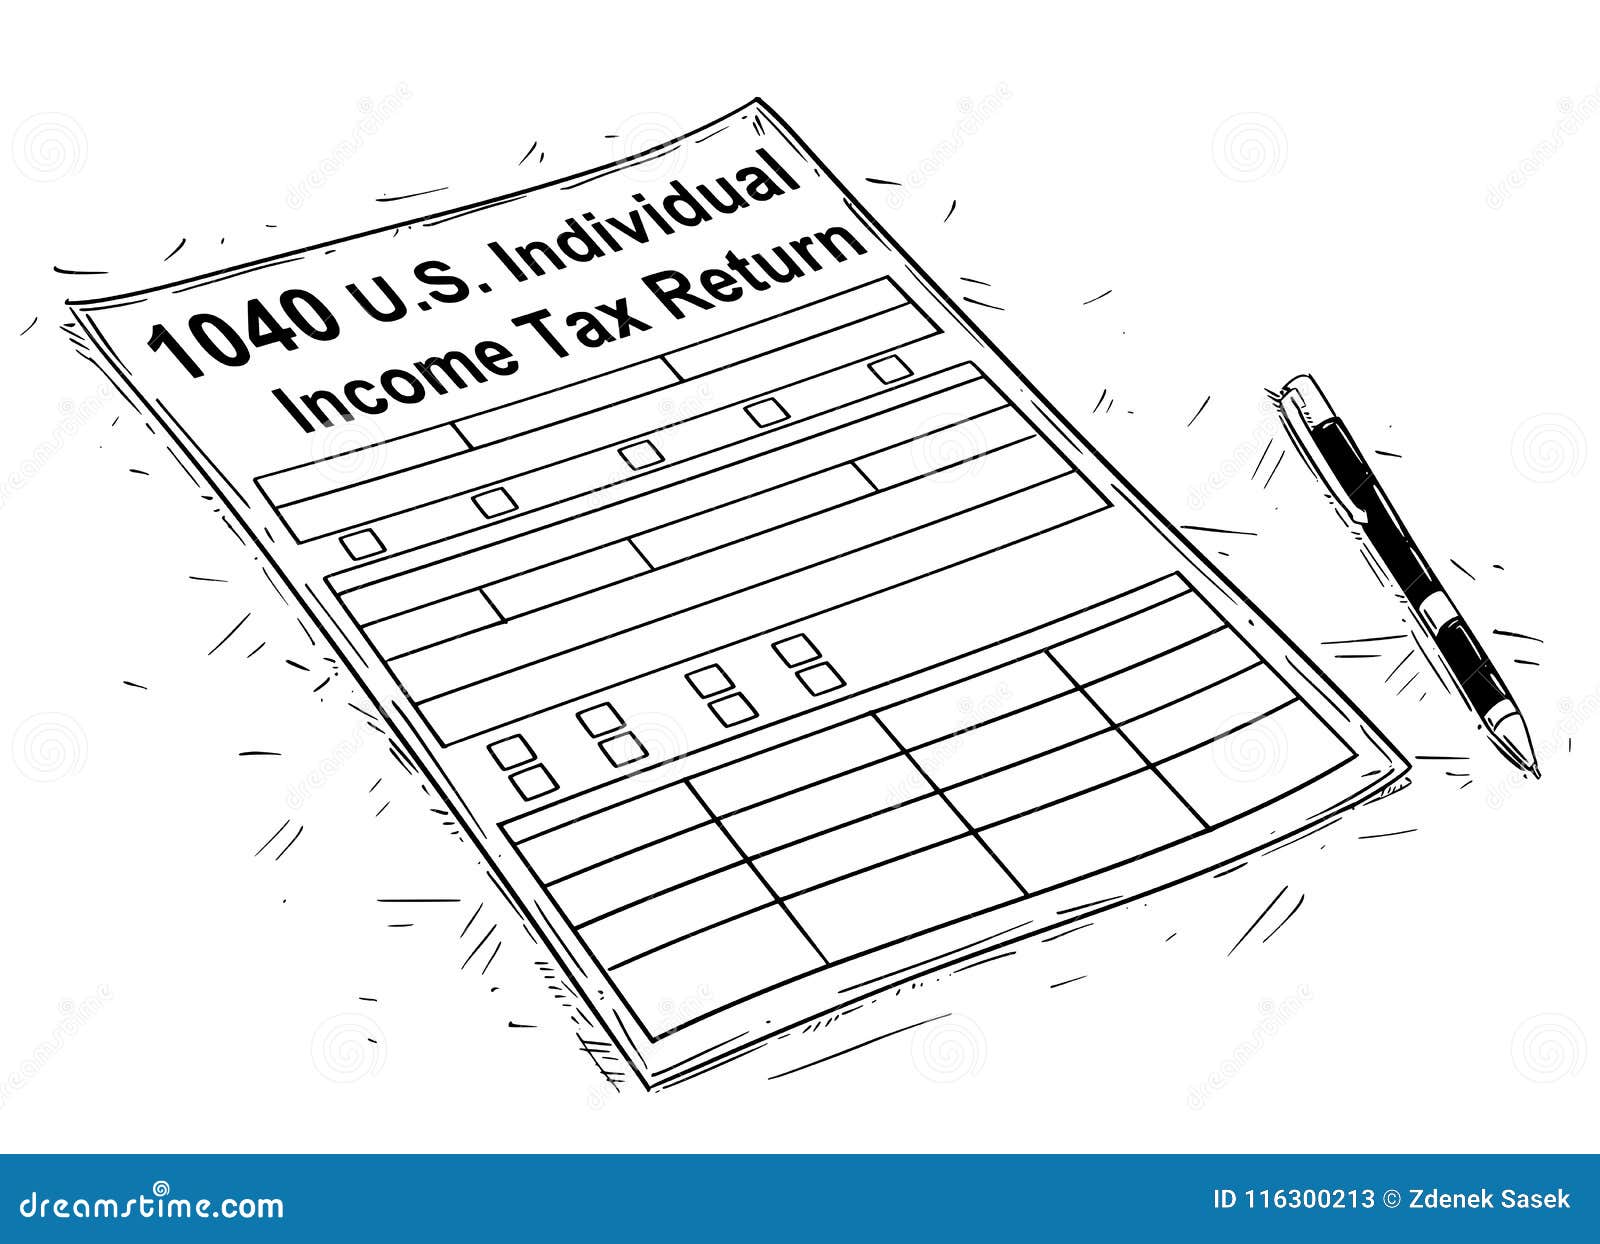 Income tax day drawing July 24th - YouTube